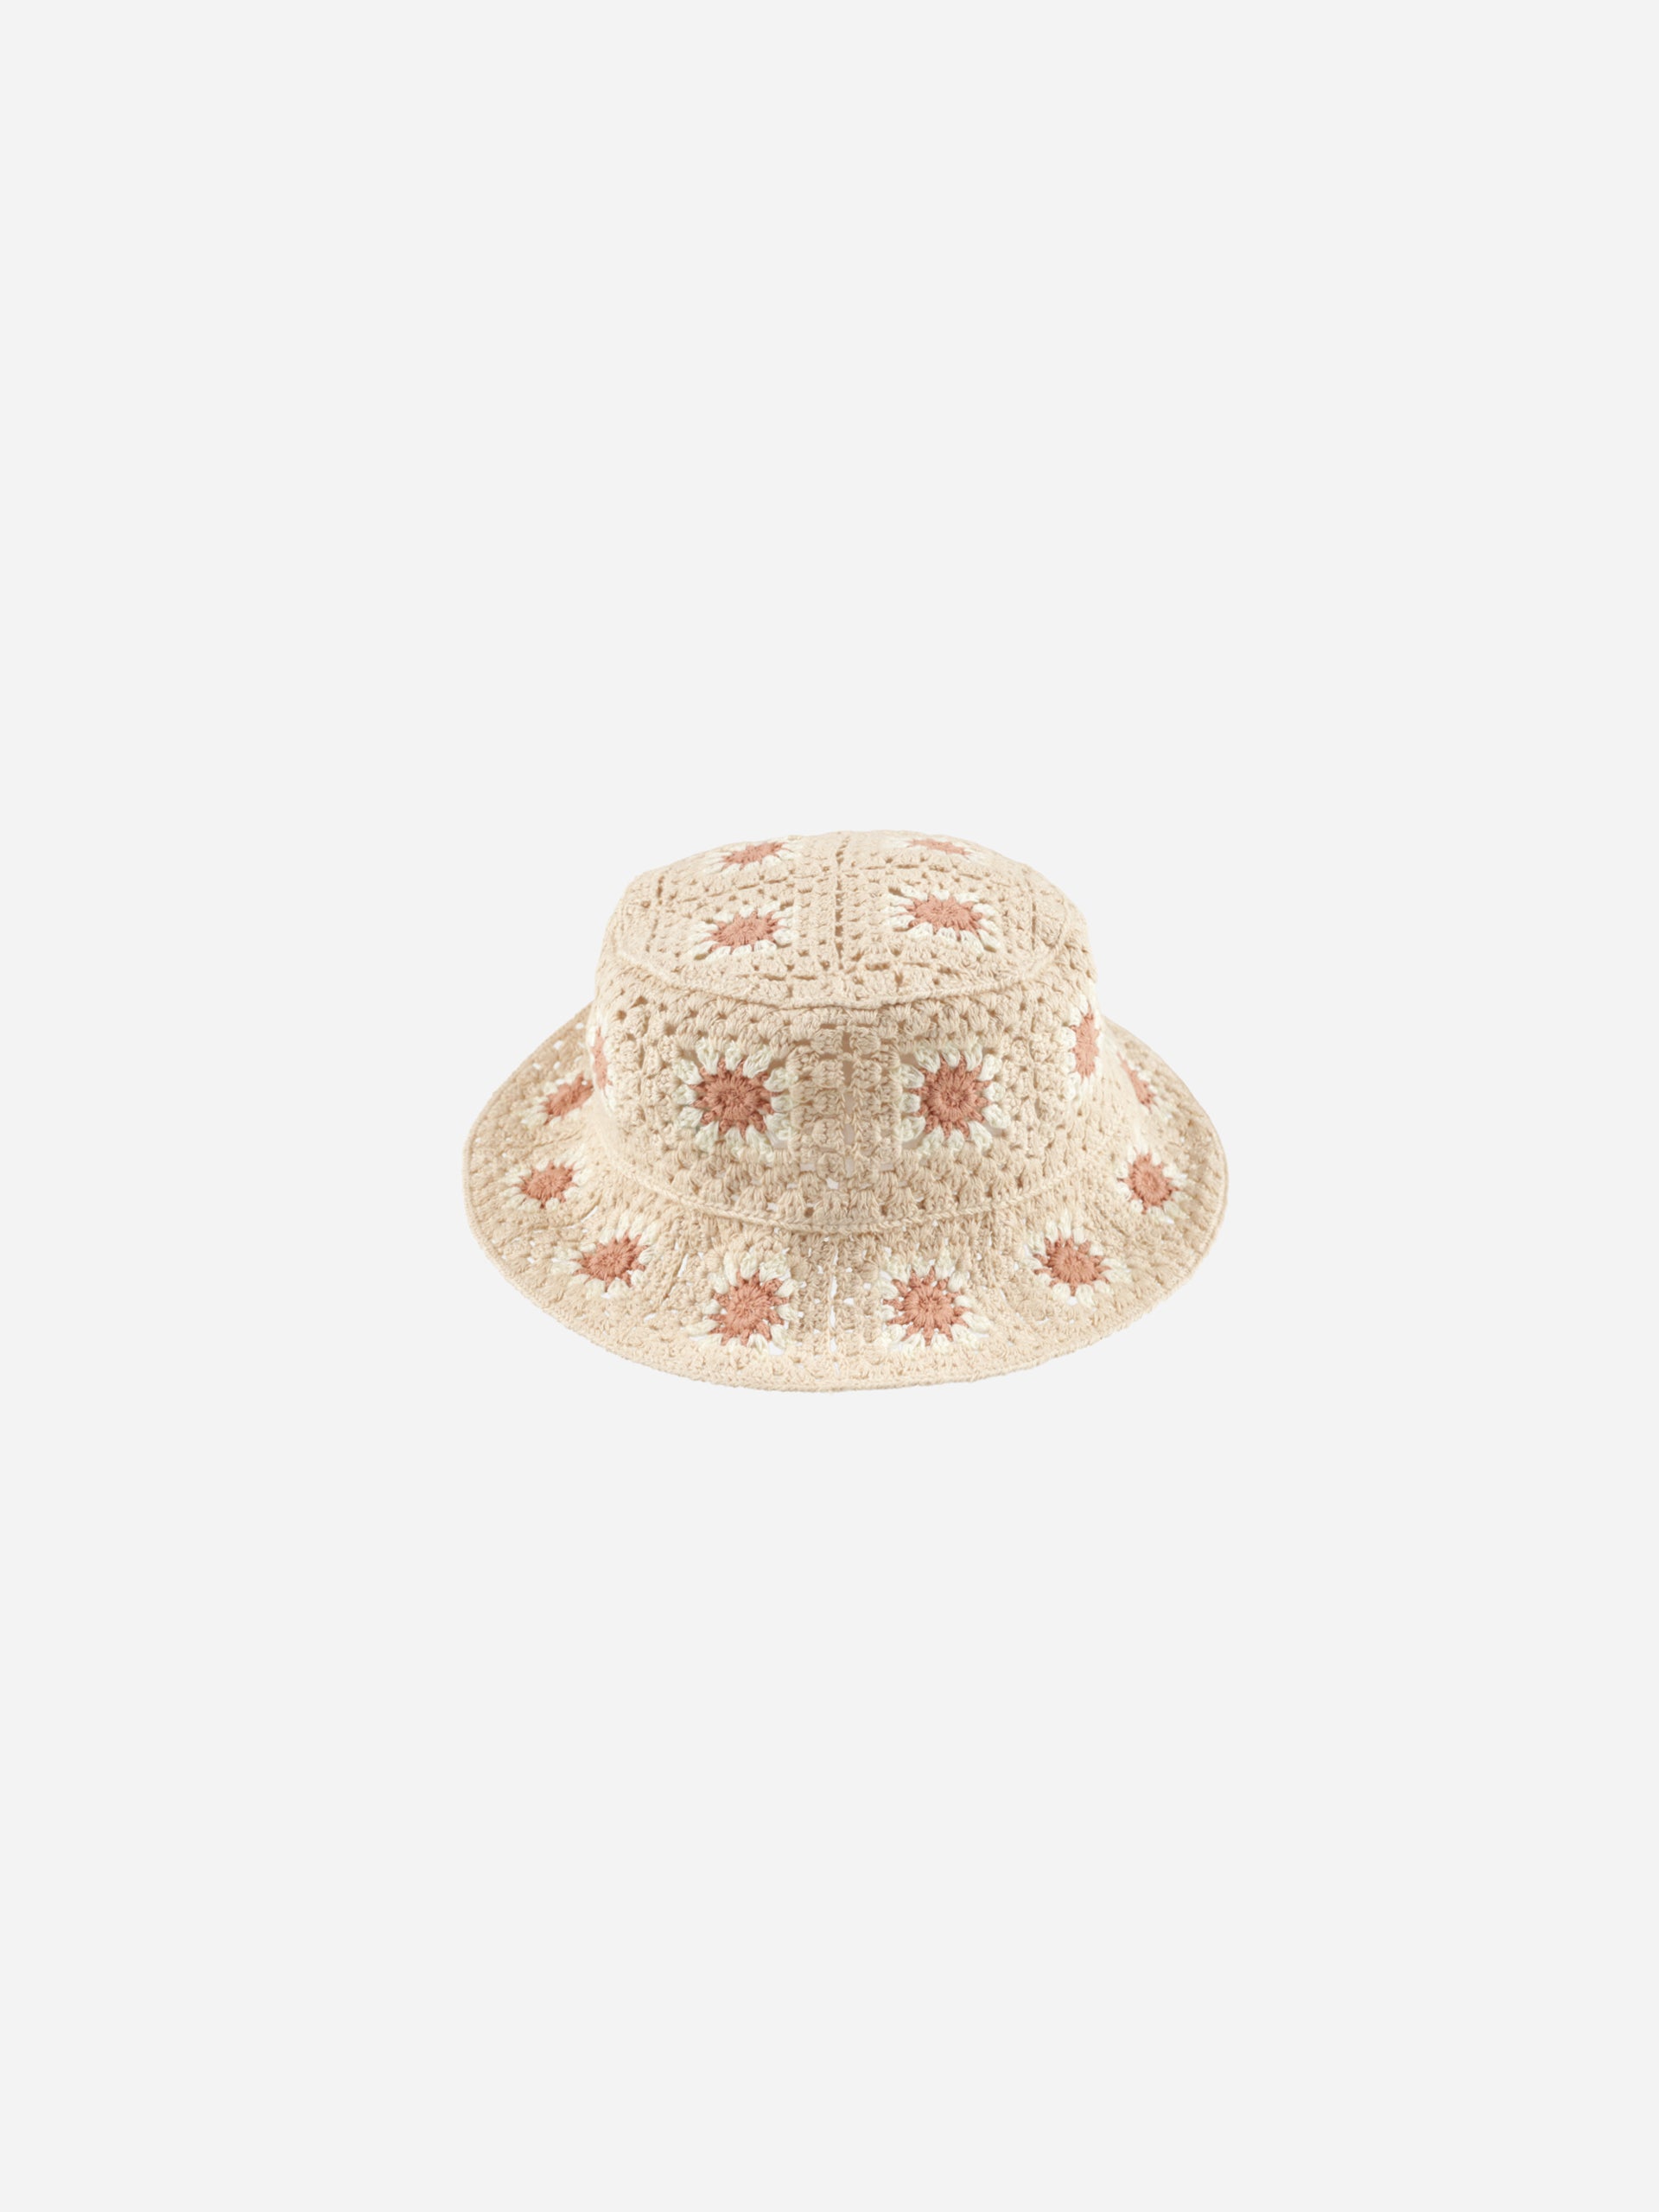 Crochet Bucket Hat || Floral - Rylee + Cru | Kids Clothes | Trendy Baby Clothes | Modern Infant Outfits |